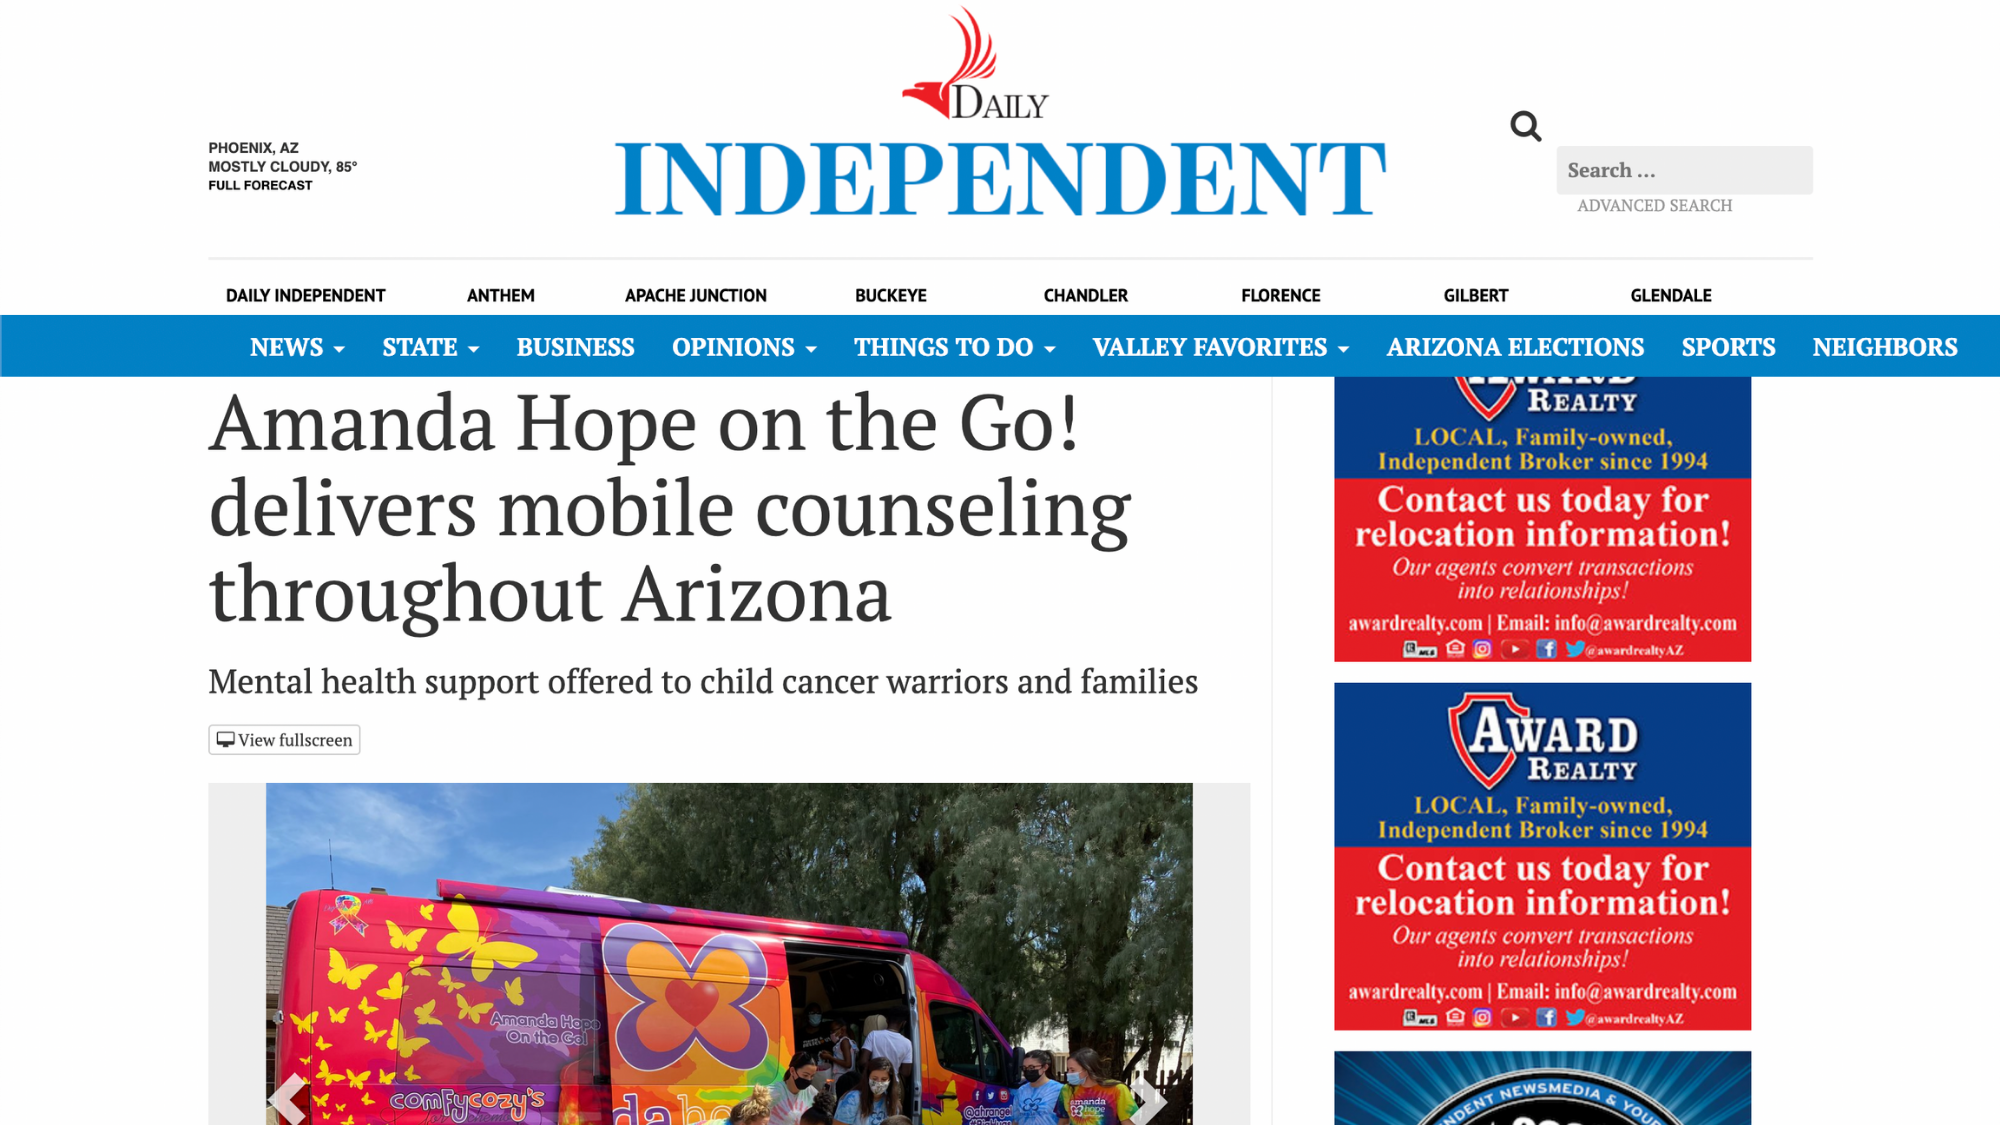 Daily Independent: Amanda Hope on the Go! delivers mobile counseling throughout Arizona (Copy)